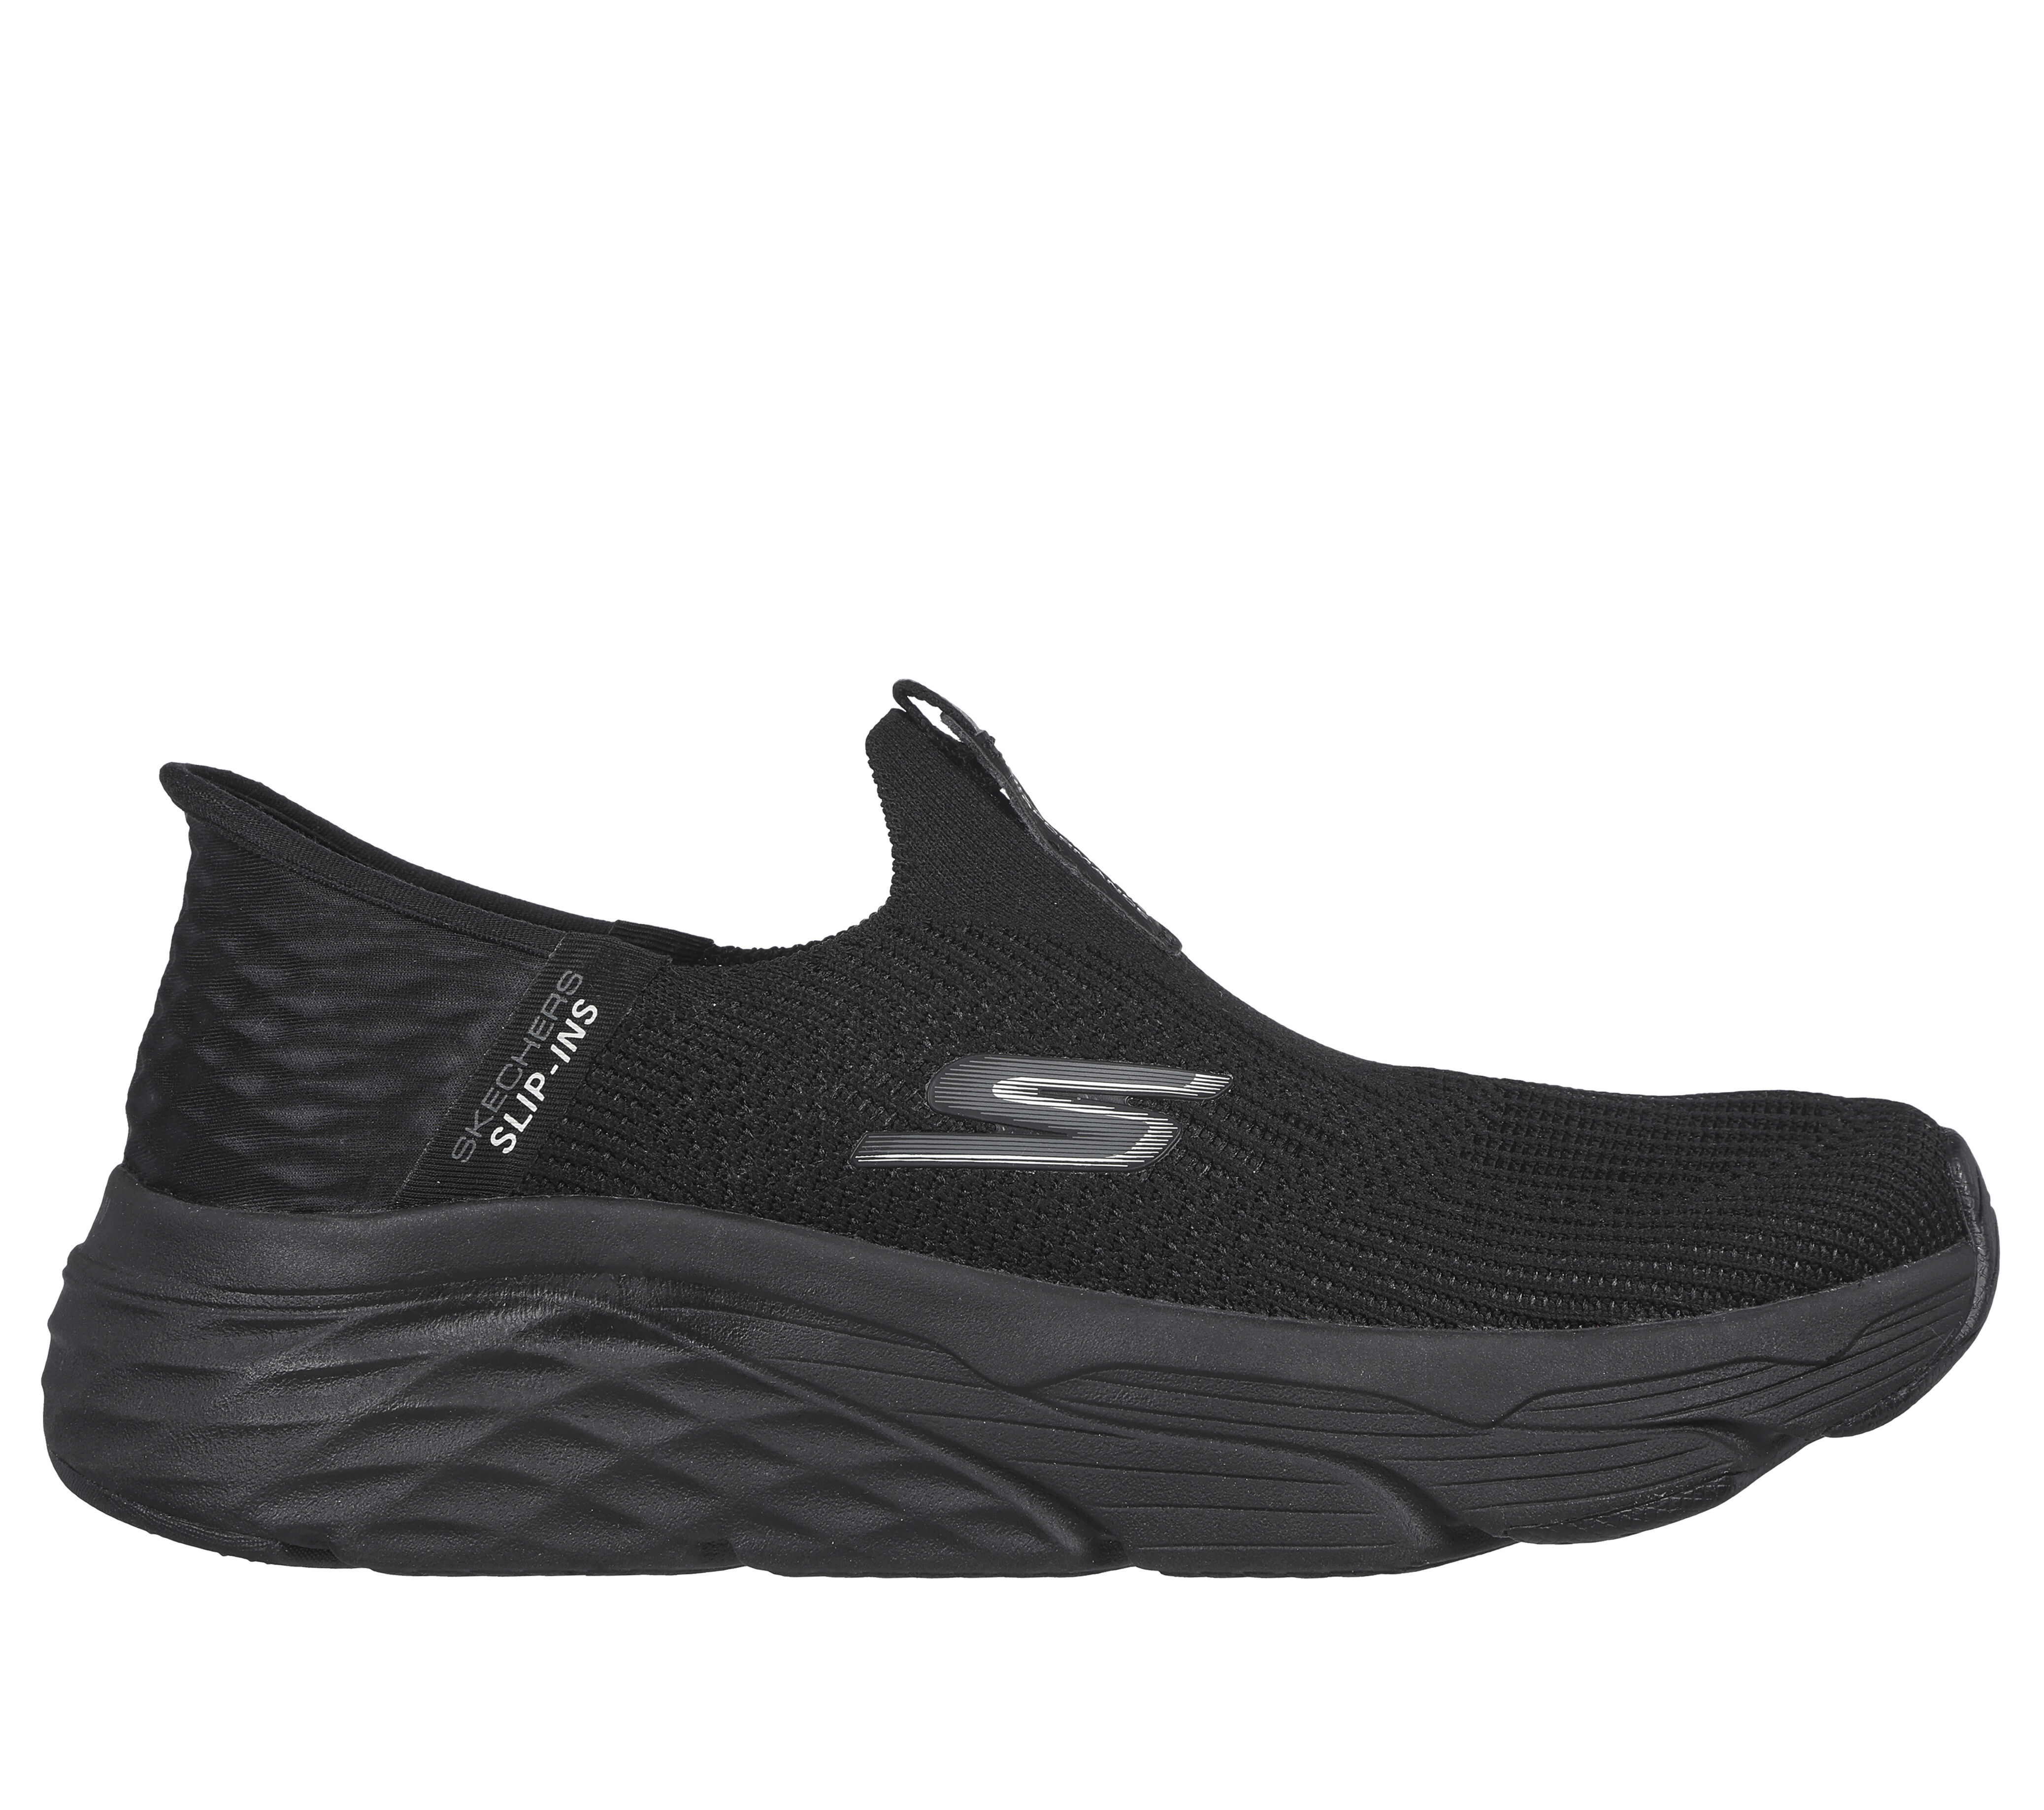 Shop the Skechers Slip-ins: Max Cushioning - Smooth | SKECHERS